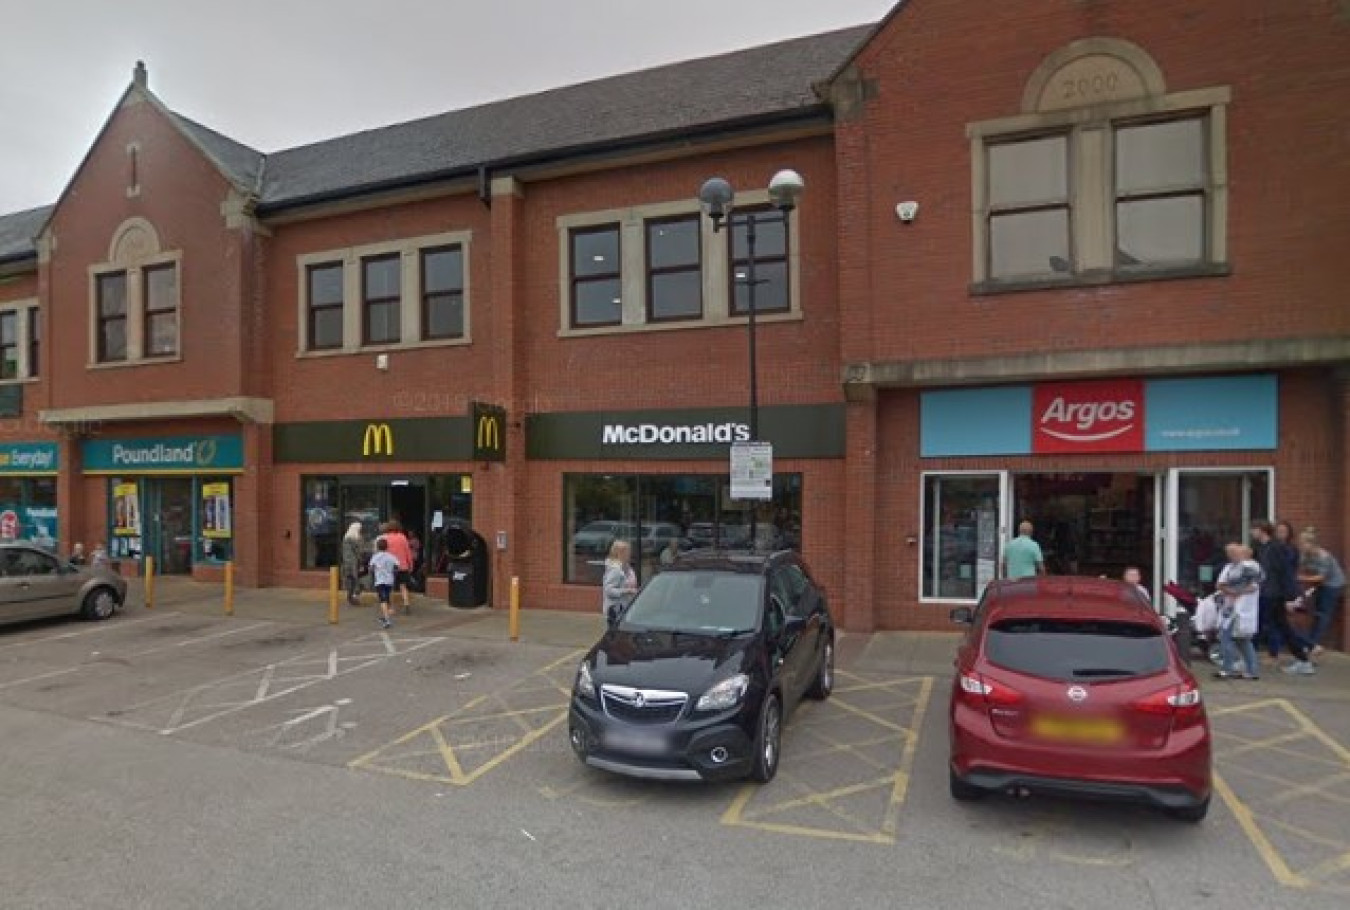 Police Appeal After Woman Sexually Assaulted In Ormskirk Mcdonalds